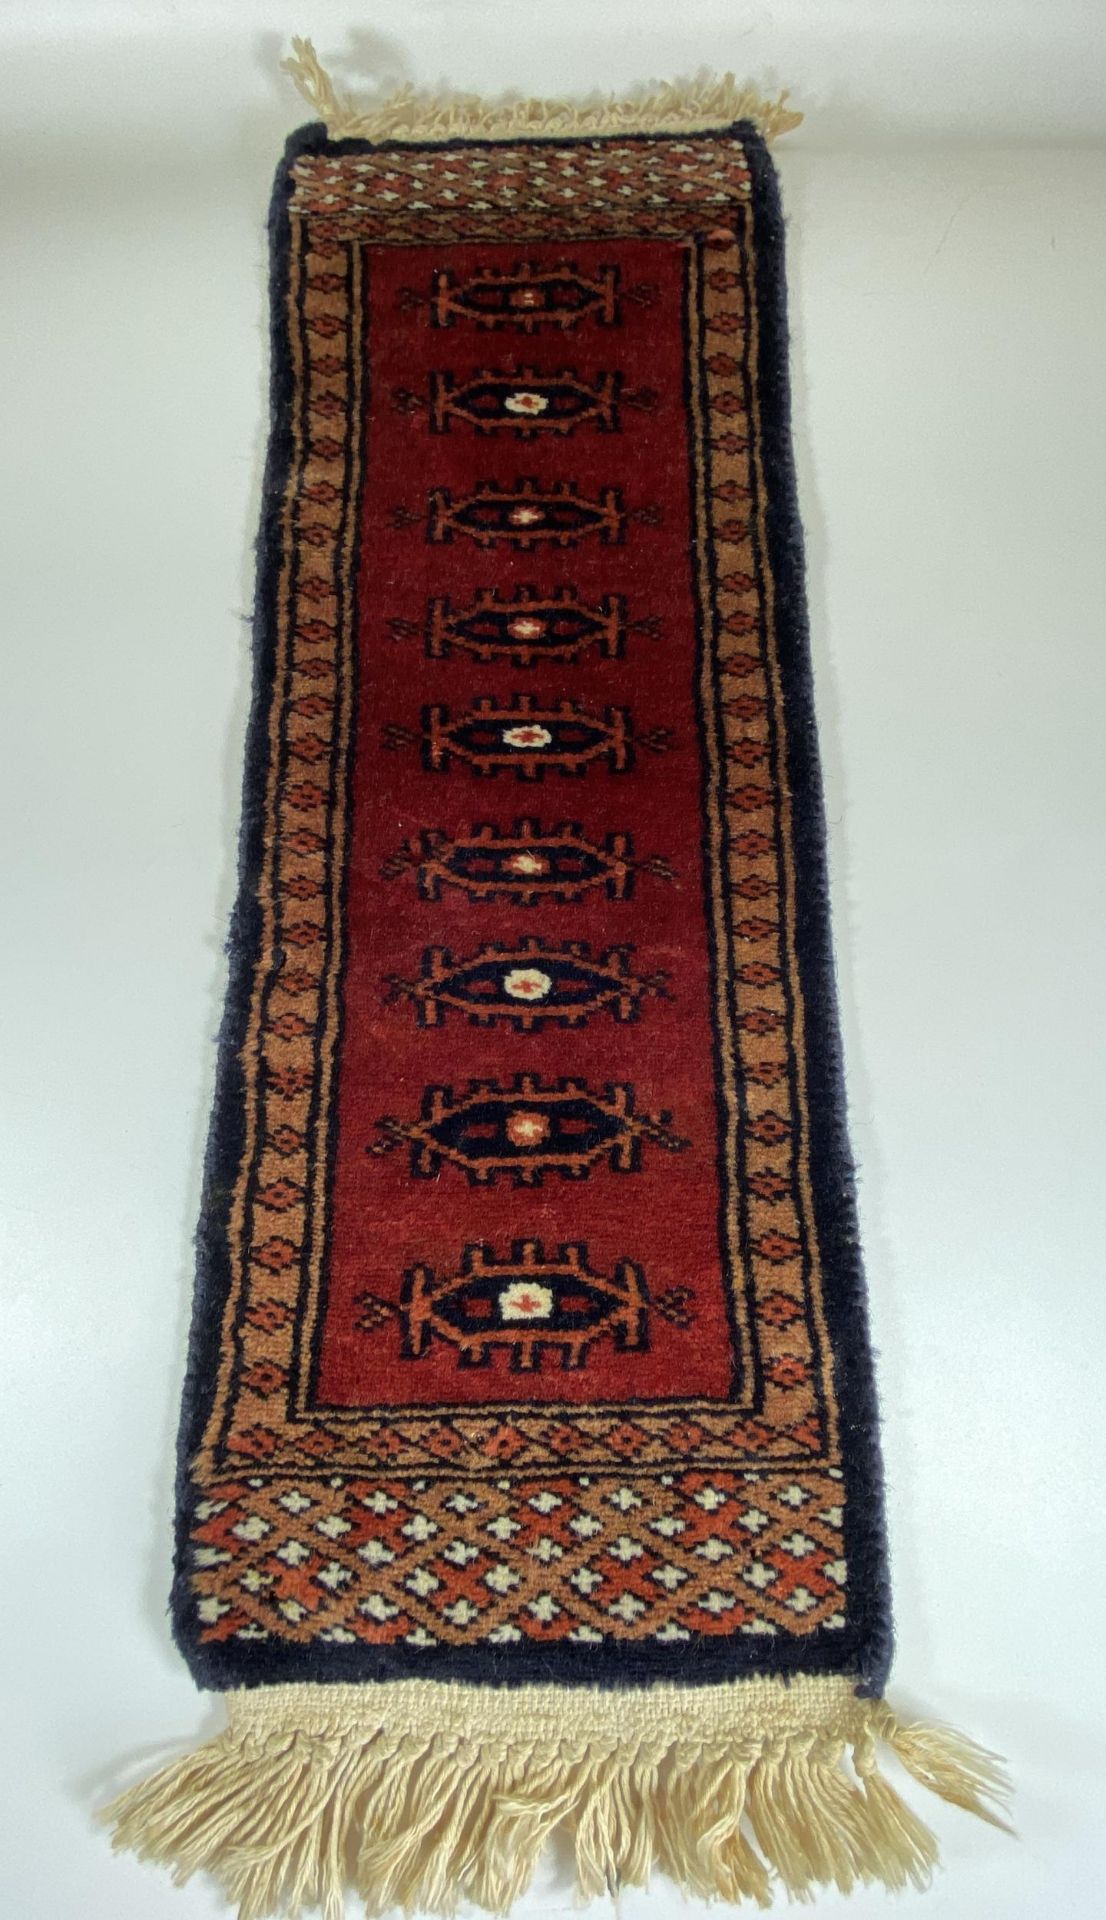 A VINTAGE MIDDLE EASTERN PERSIAN RED SAMPLE RUNNER, LENGTH 63CM